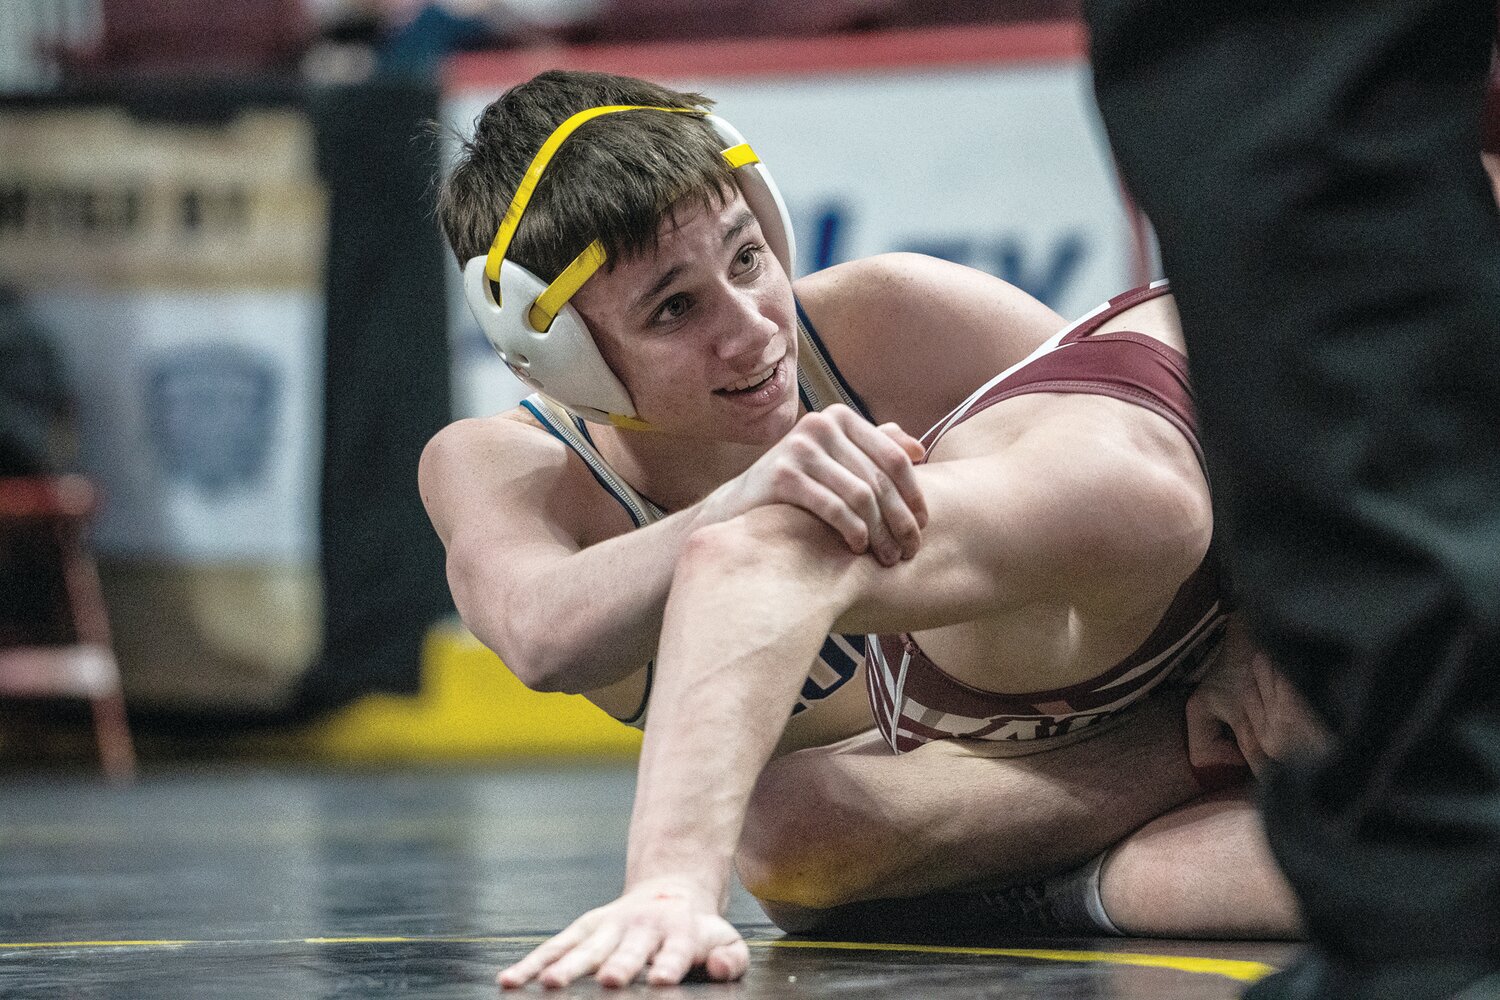 Council Rock South’s Connor Lenahan finished fifth in the 114-pound class of the PIAA 3A tournament.